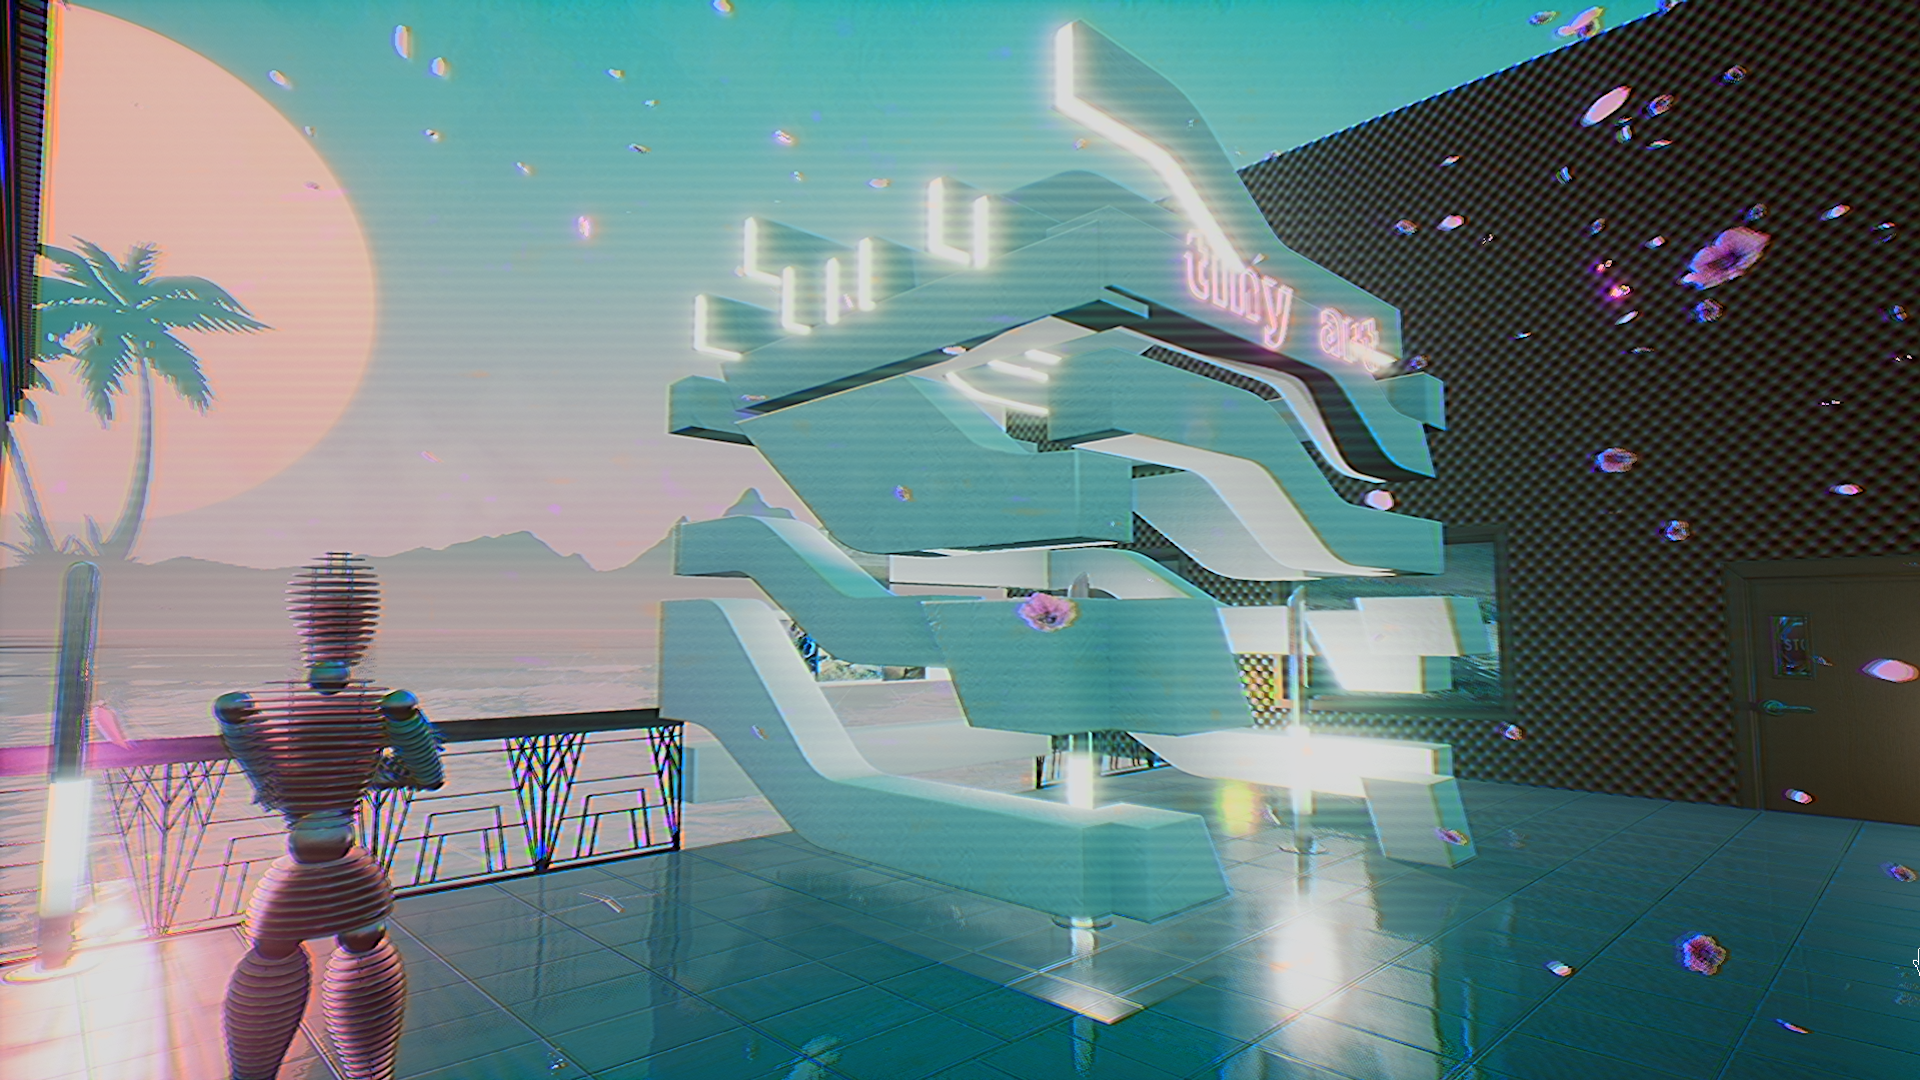 A futuristic gallery with '80s-style neon